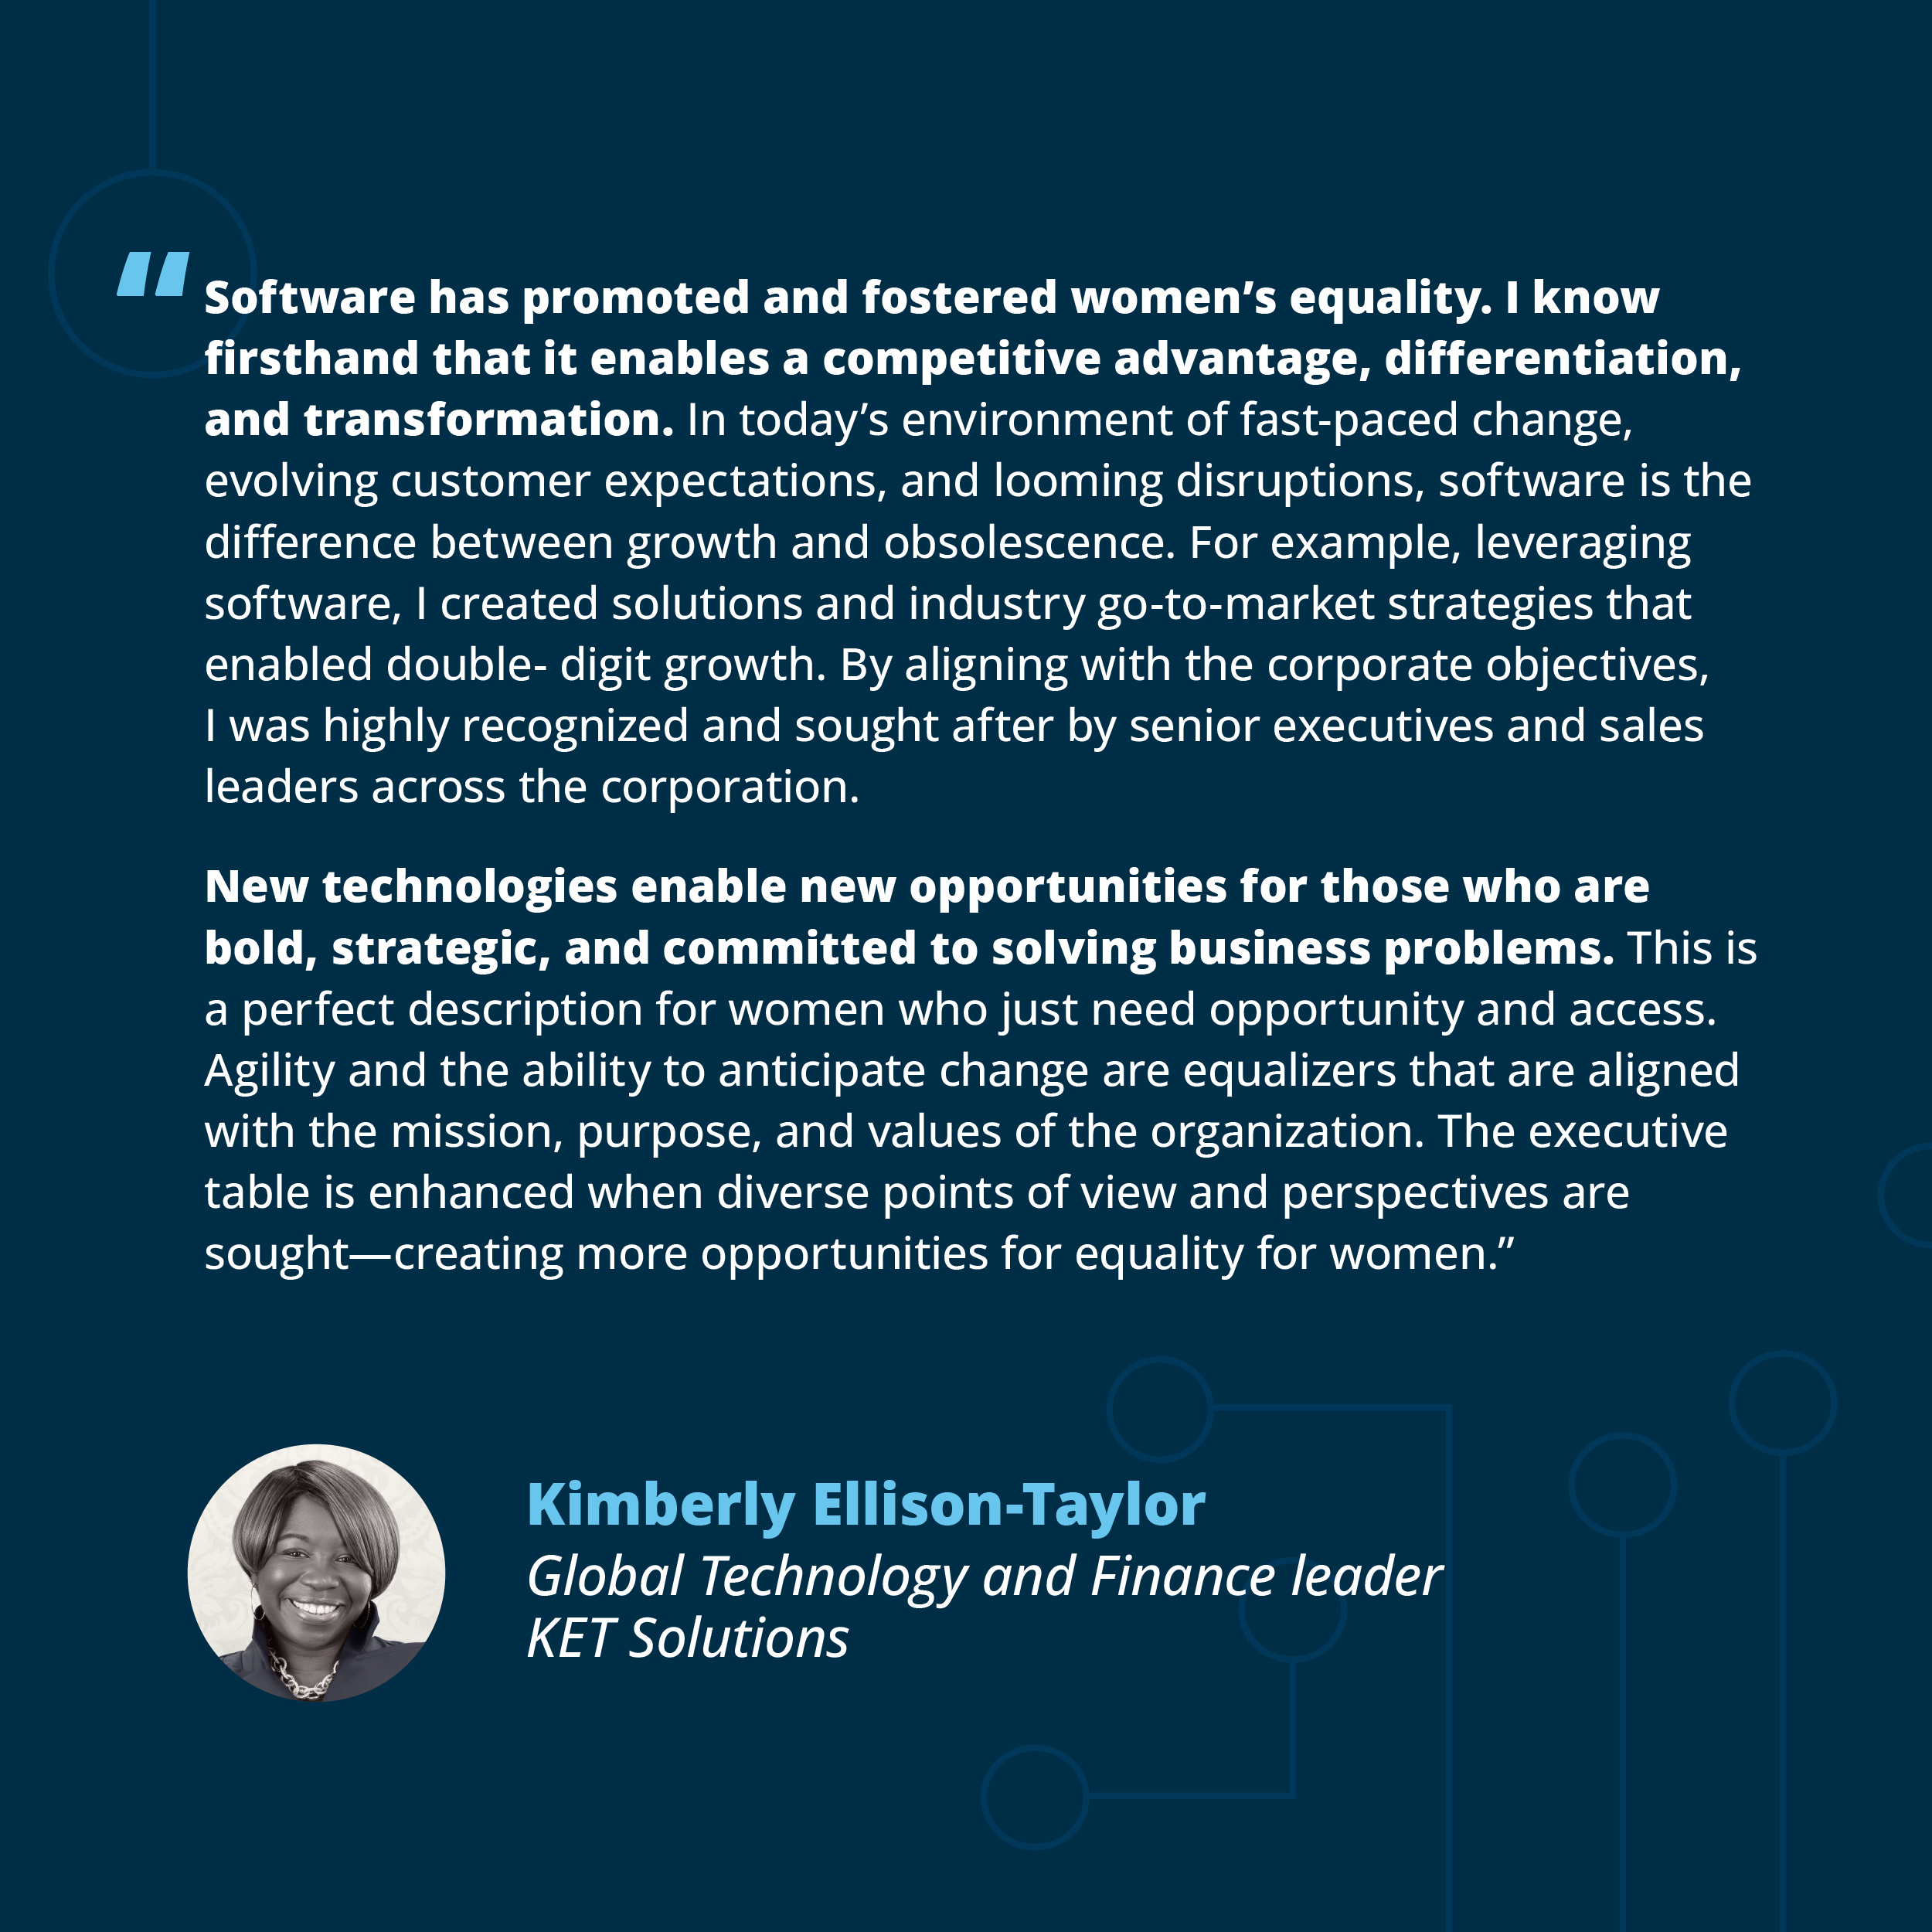 Ellison-Taylor quote for the blog article "4 Ways Software Has Promoted Workplace Equity for Women"